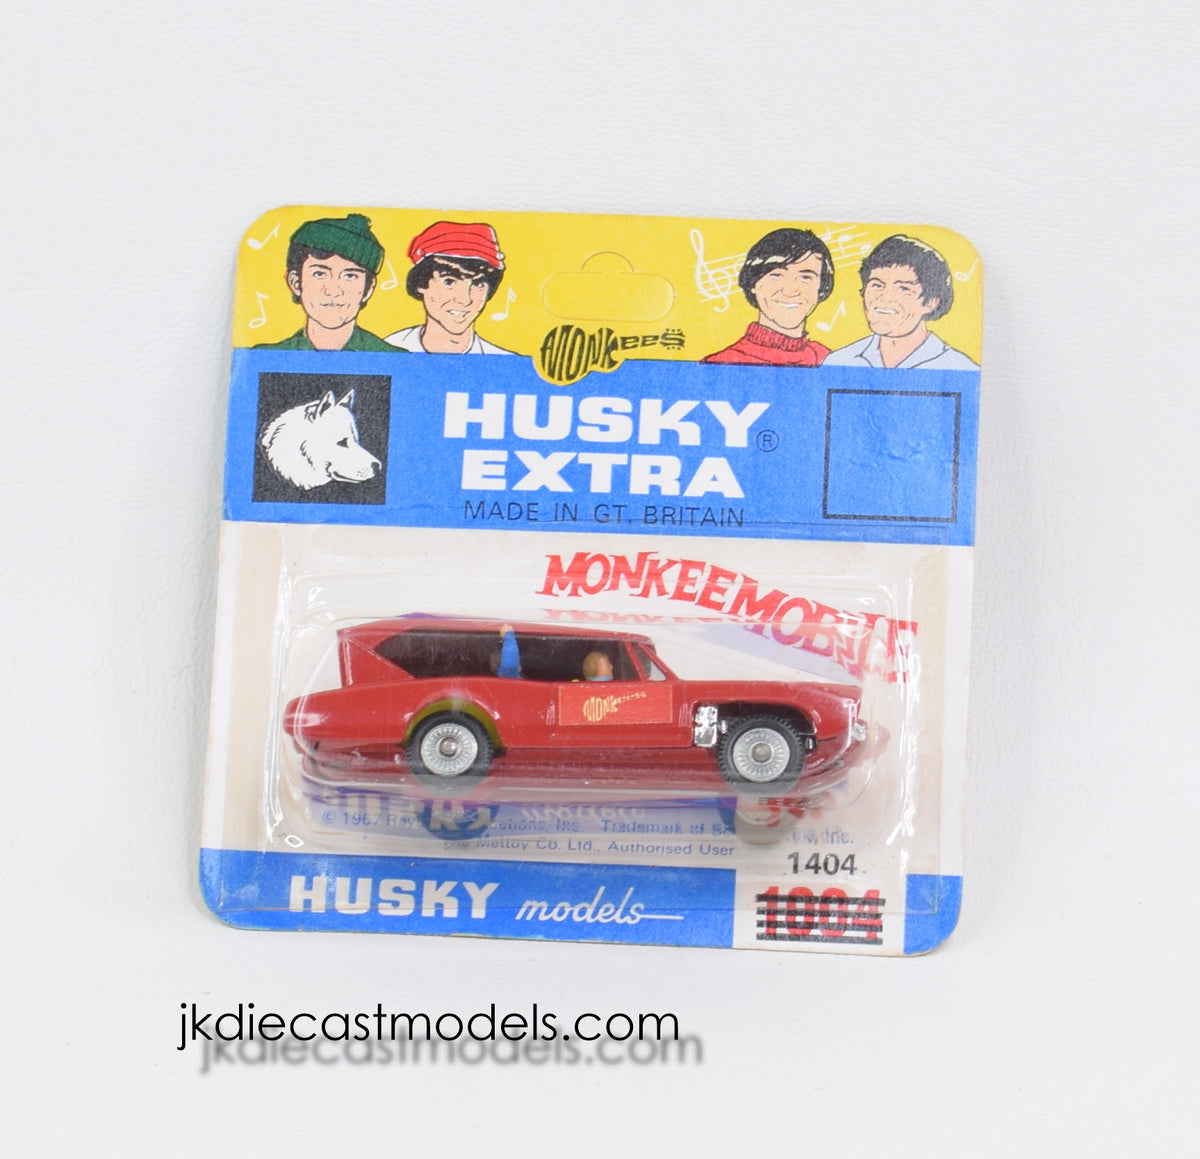 Husky models 1404 Monkeemobile M.O.C ''The Winchester Collection''